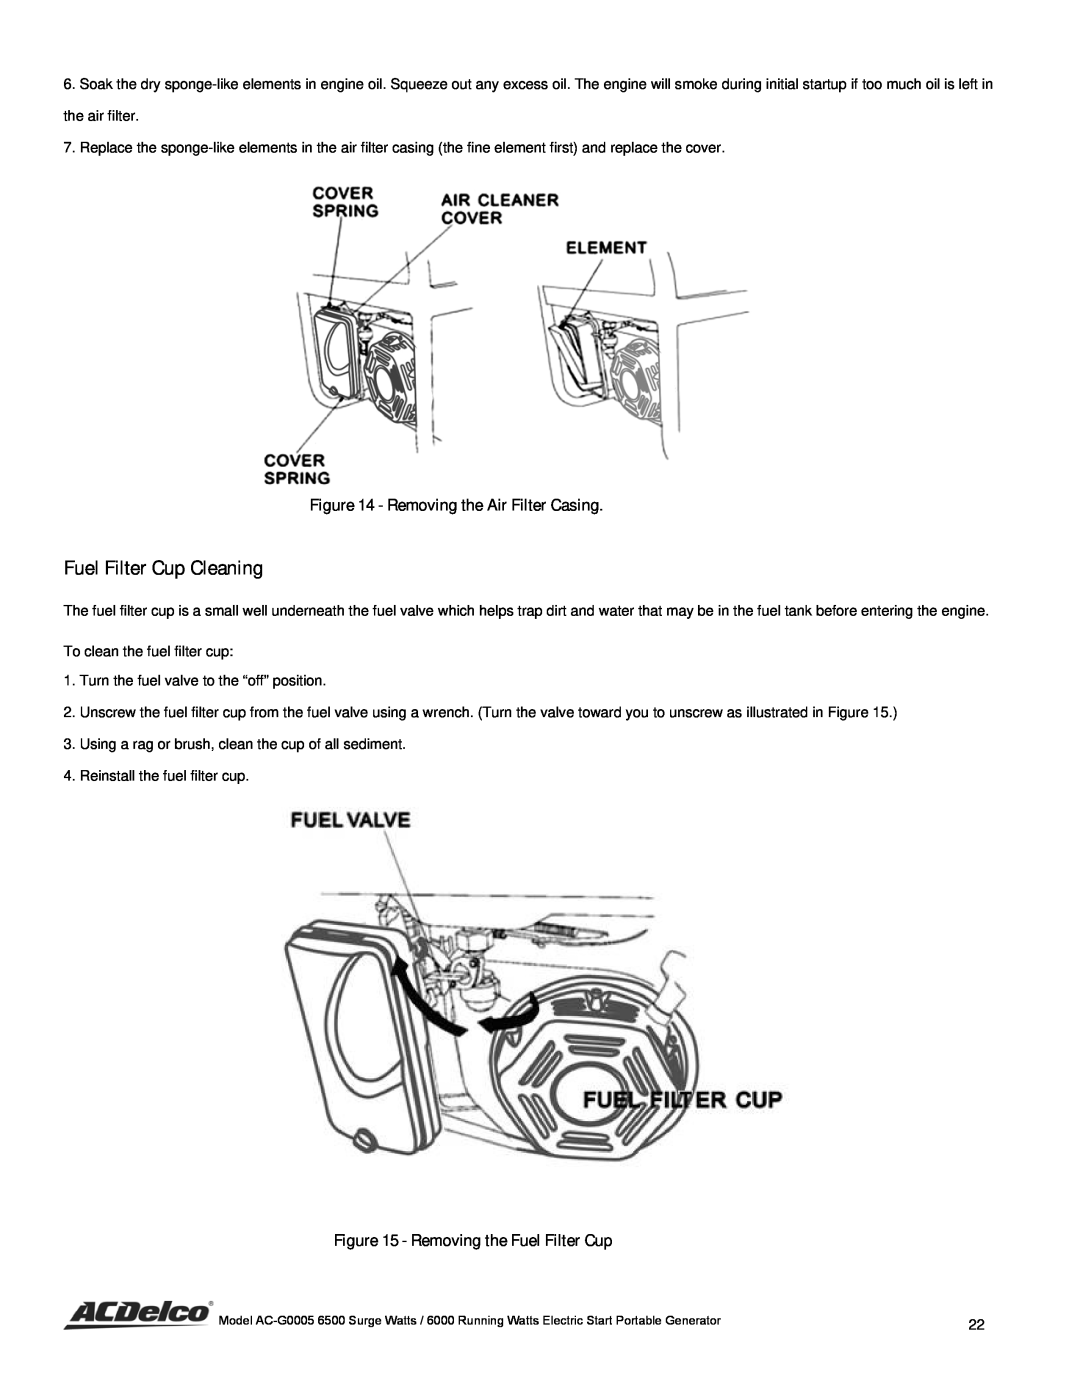 ACDelco AC-G0005 instruction manual Fuel Filter Cup Cleaning, Removing the Air Filter Casing, Removing the Fuel Filter Cup 